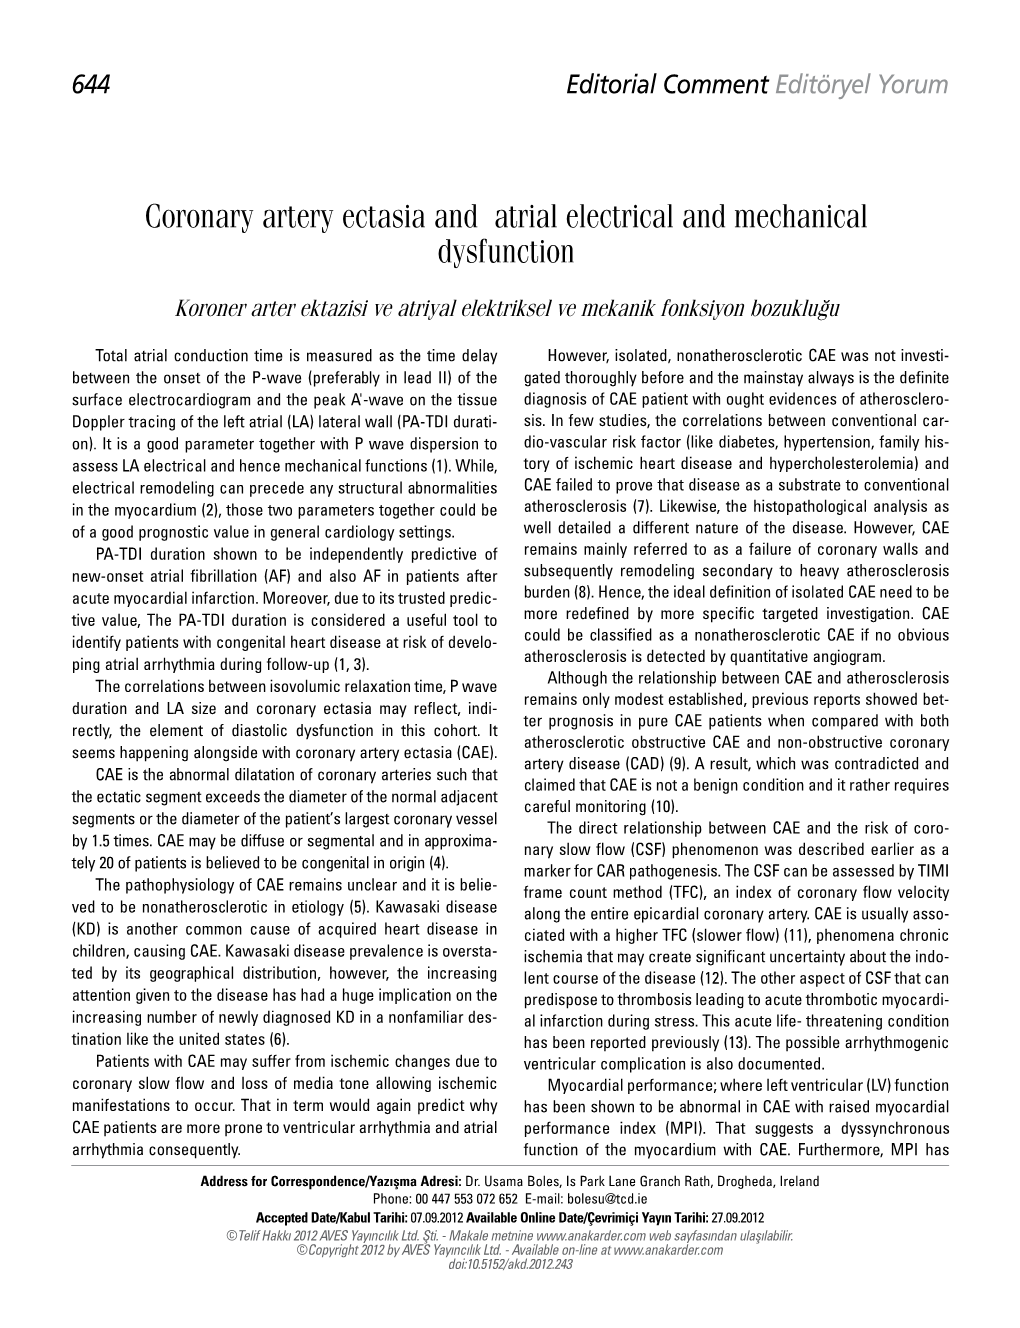 Coronary Artery Ectasia and Atrial Electrical and Mechanical Dysfunction